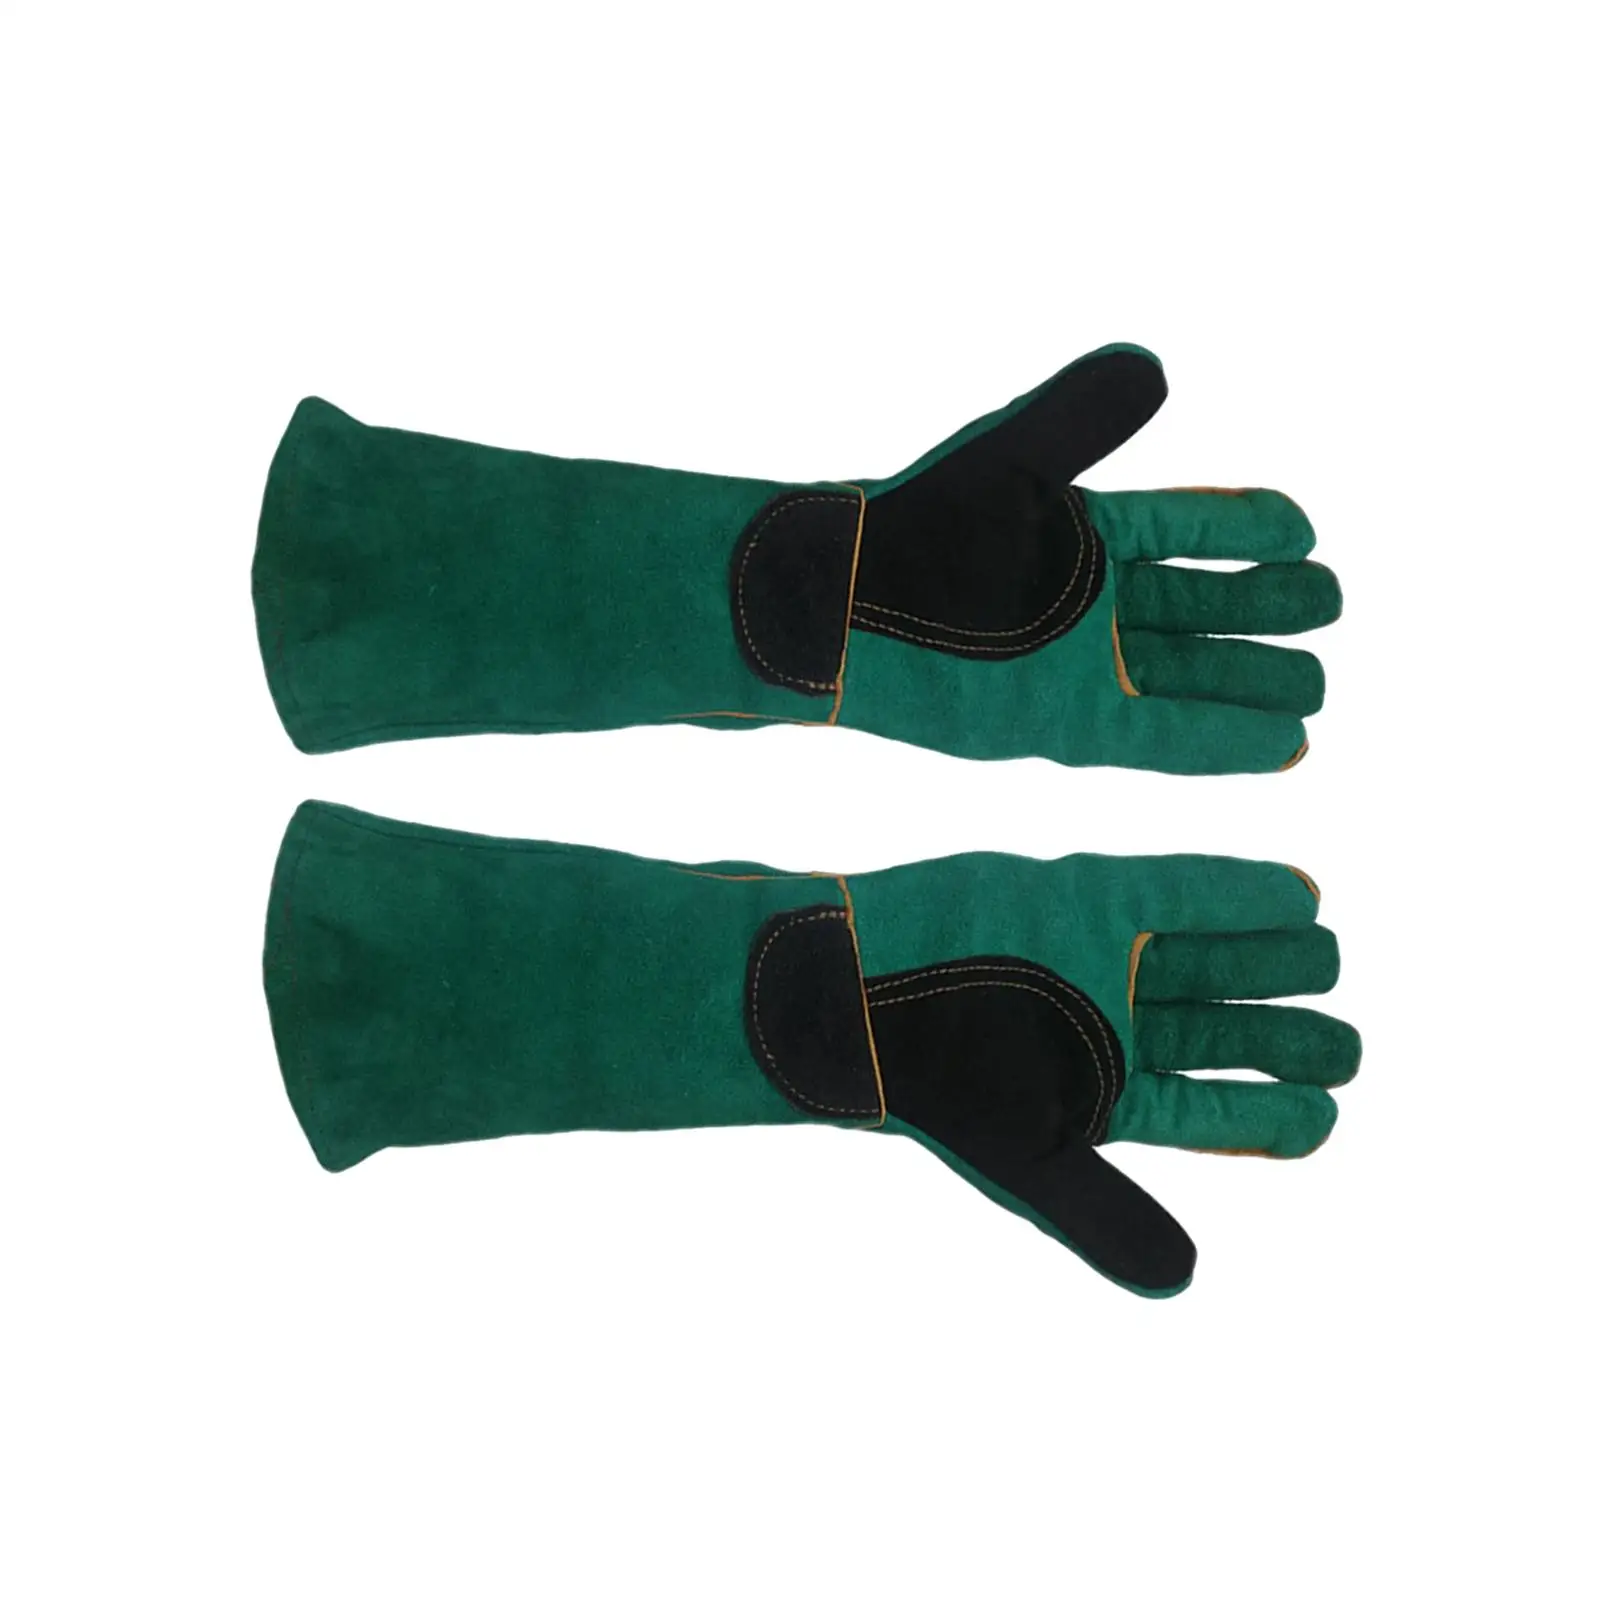 43cm Animal Handling Gloves Pet Padding for Zoo Working Dogs